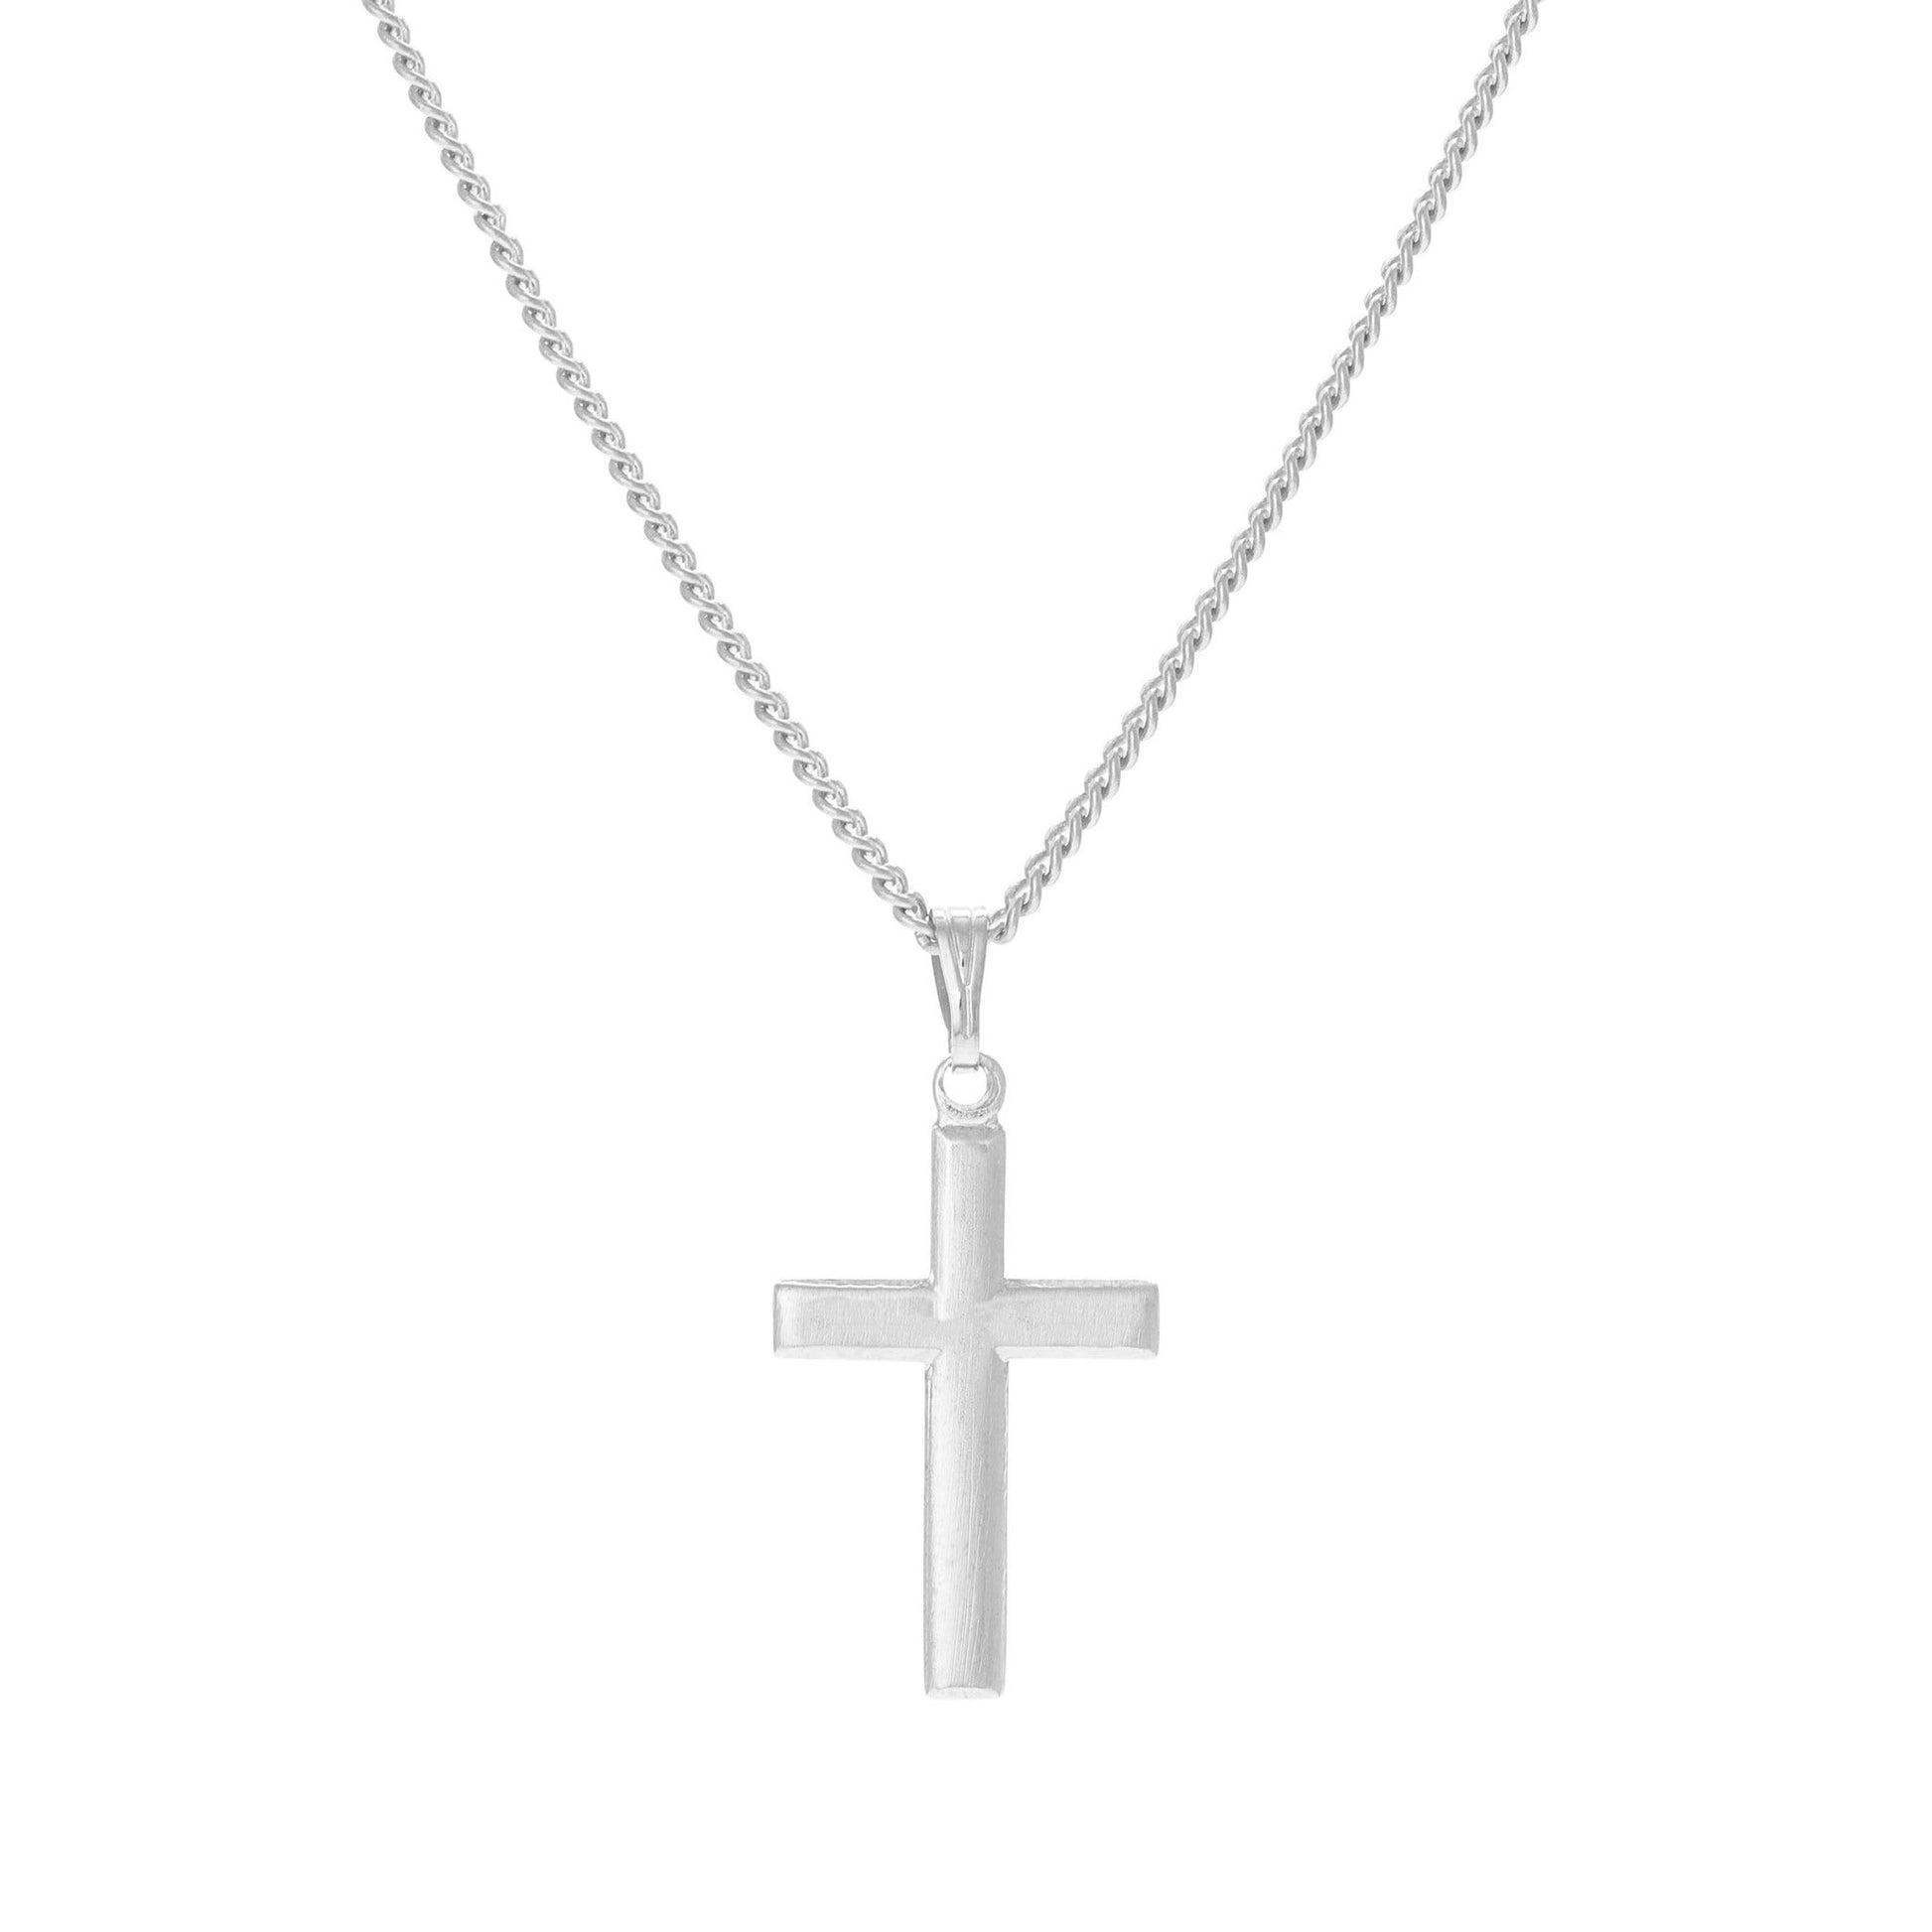 A classic cross necklace displayed on a neutral white background.